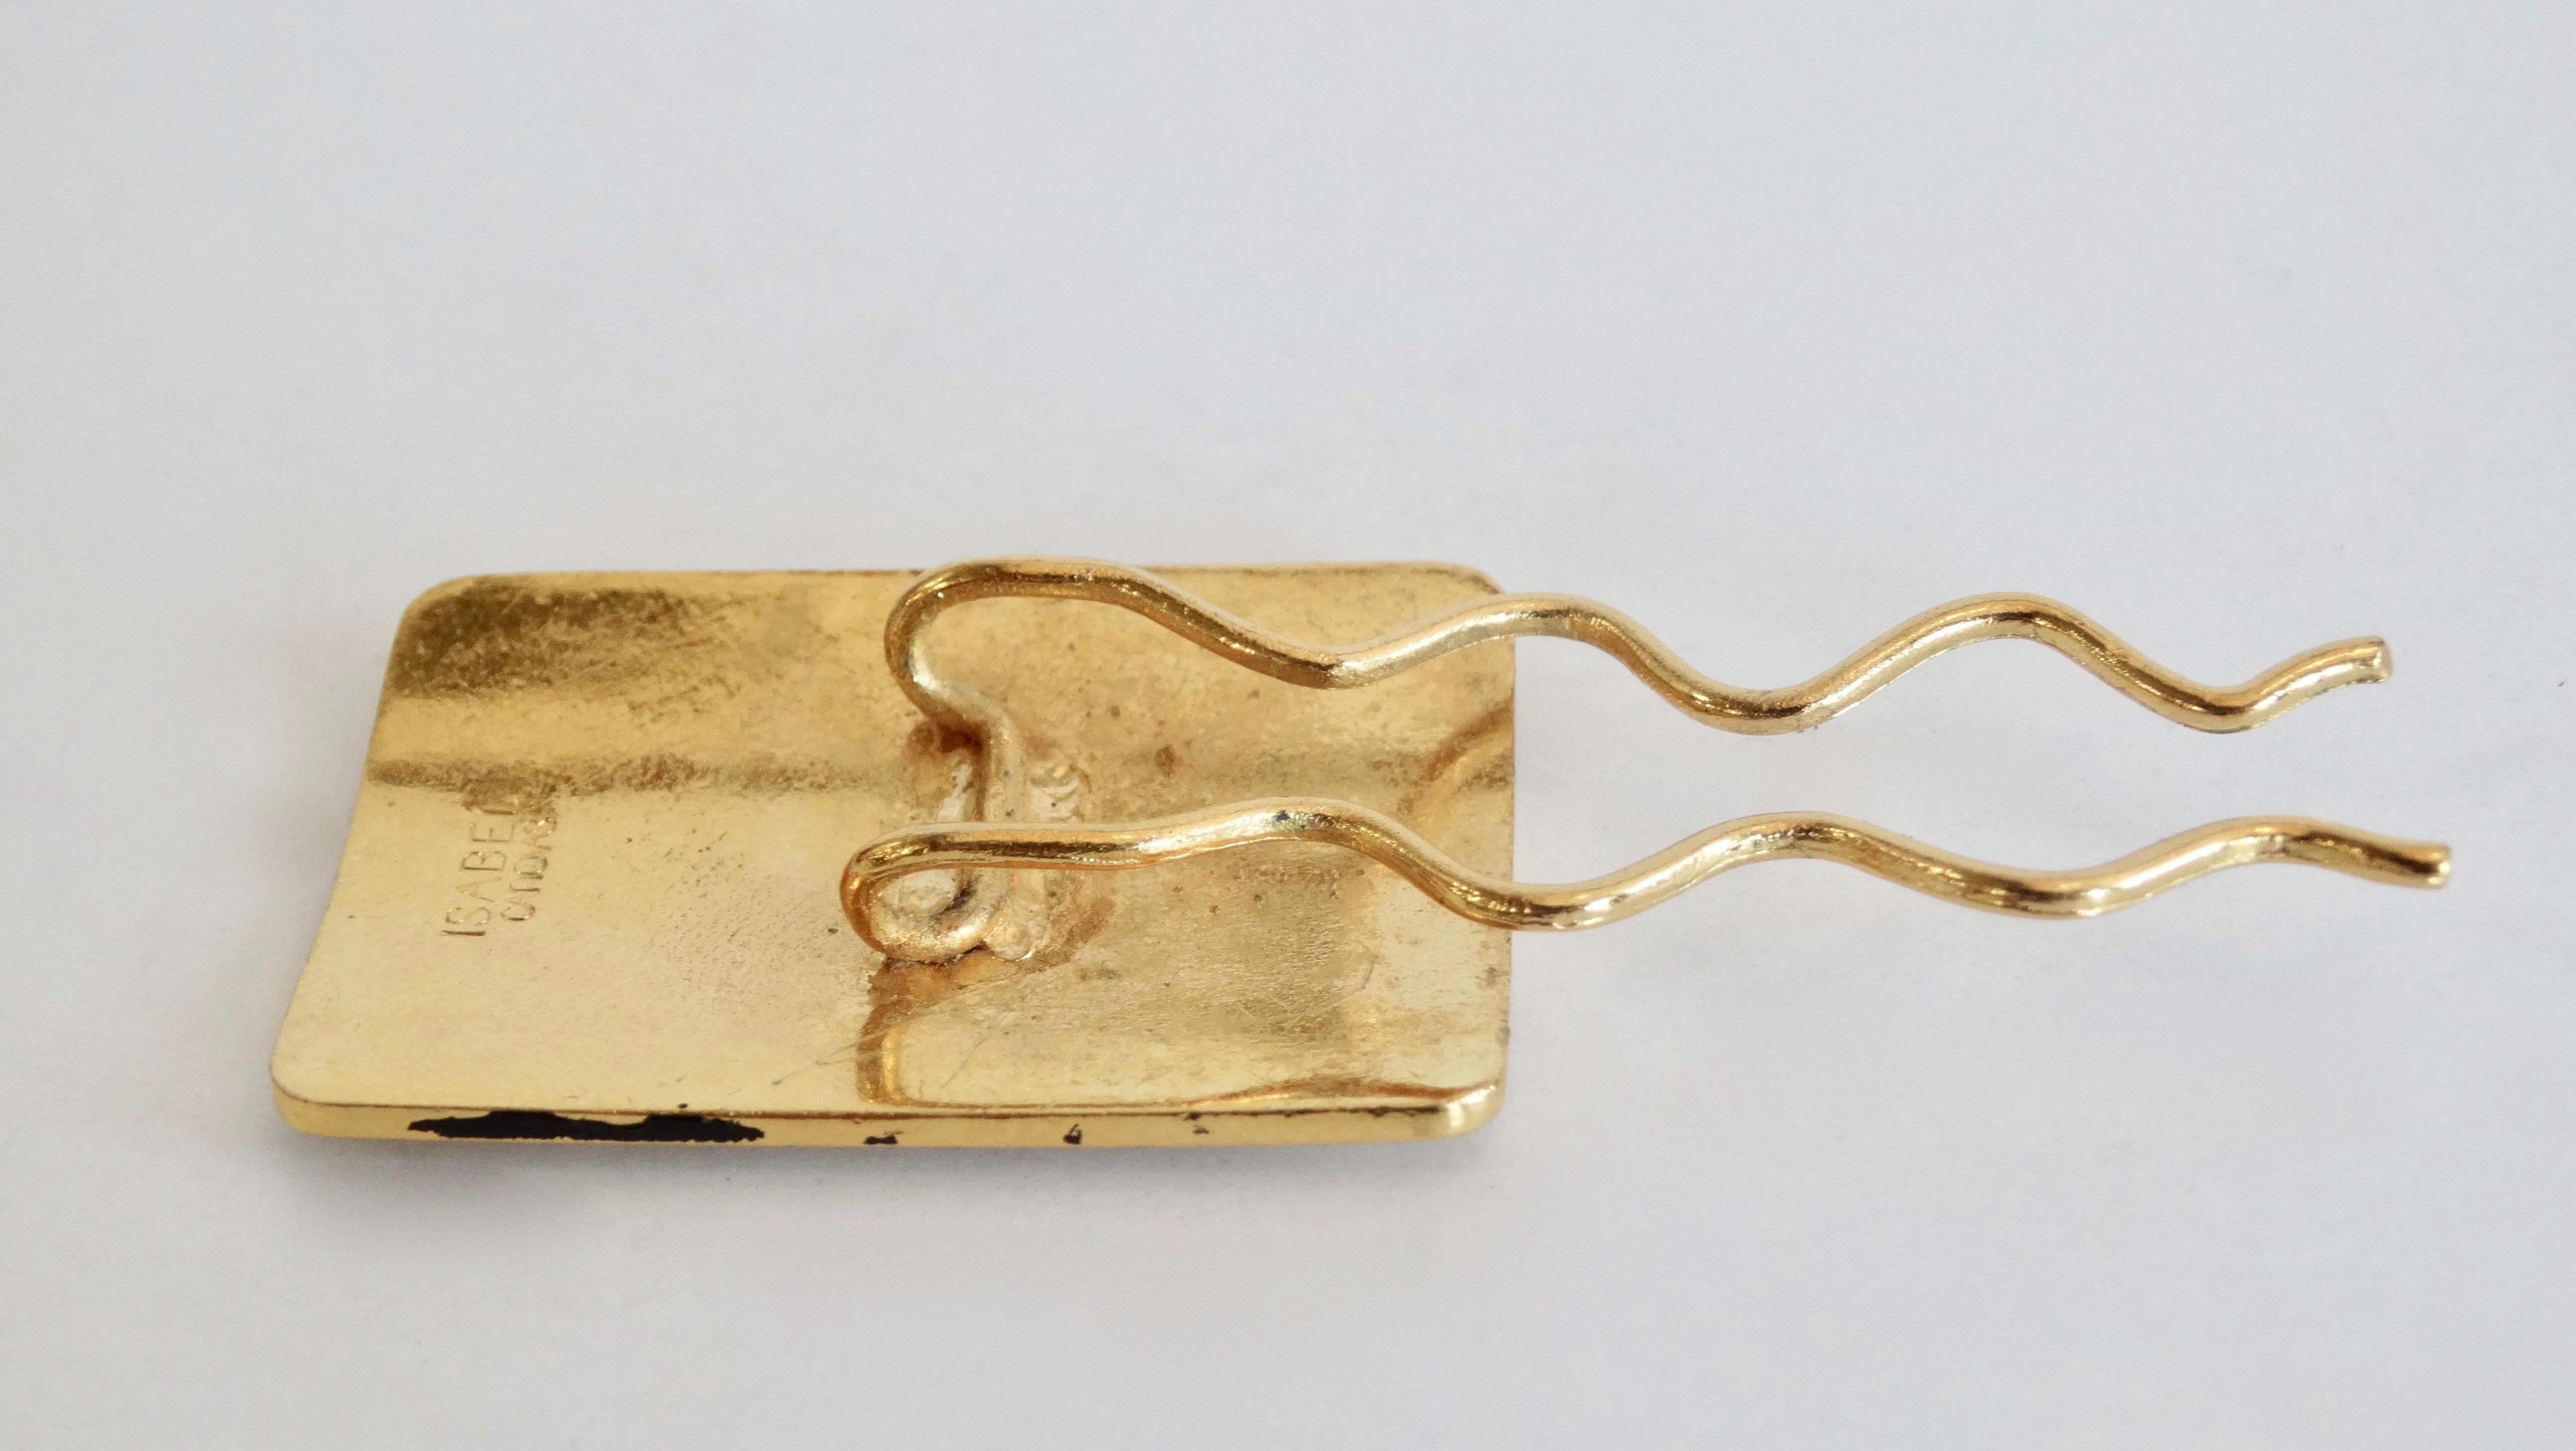 Spice up your up-do with this adorable Isabel Canovas hair pin! Circa 1980s, this gold plated rectangular hair pin features a carved motif reminiscent of the Baroque period. Looks adorable pinned in a bun! 

Note: Isabel was born in Paris in 1945.